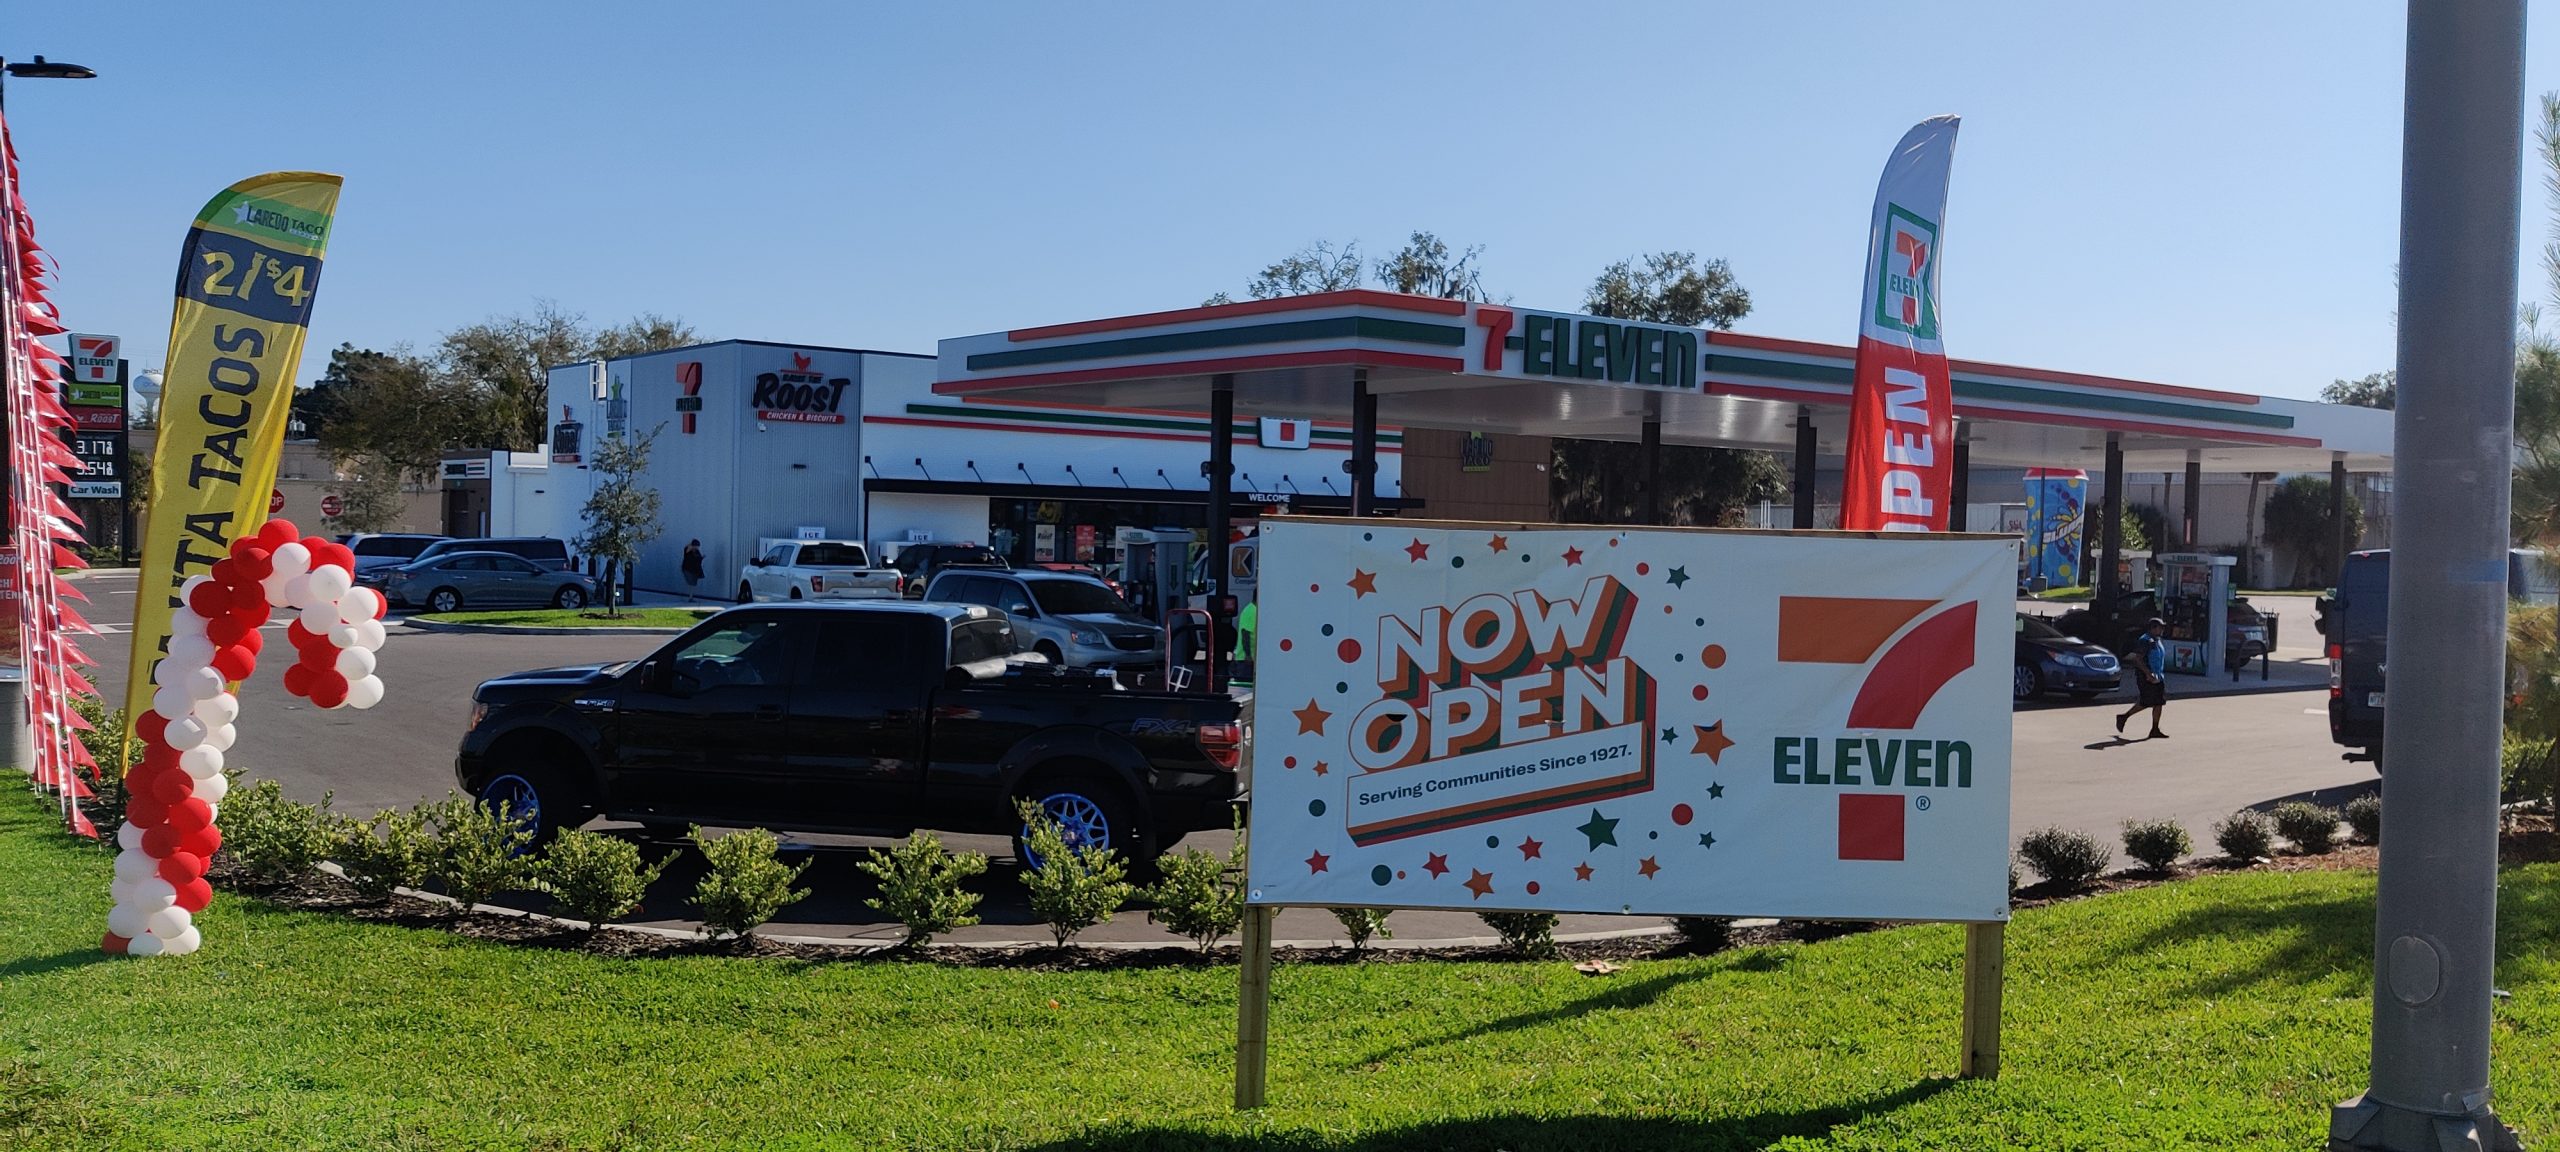 12-13-2021 Welcome 7-Eleven to Ocala